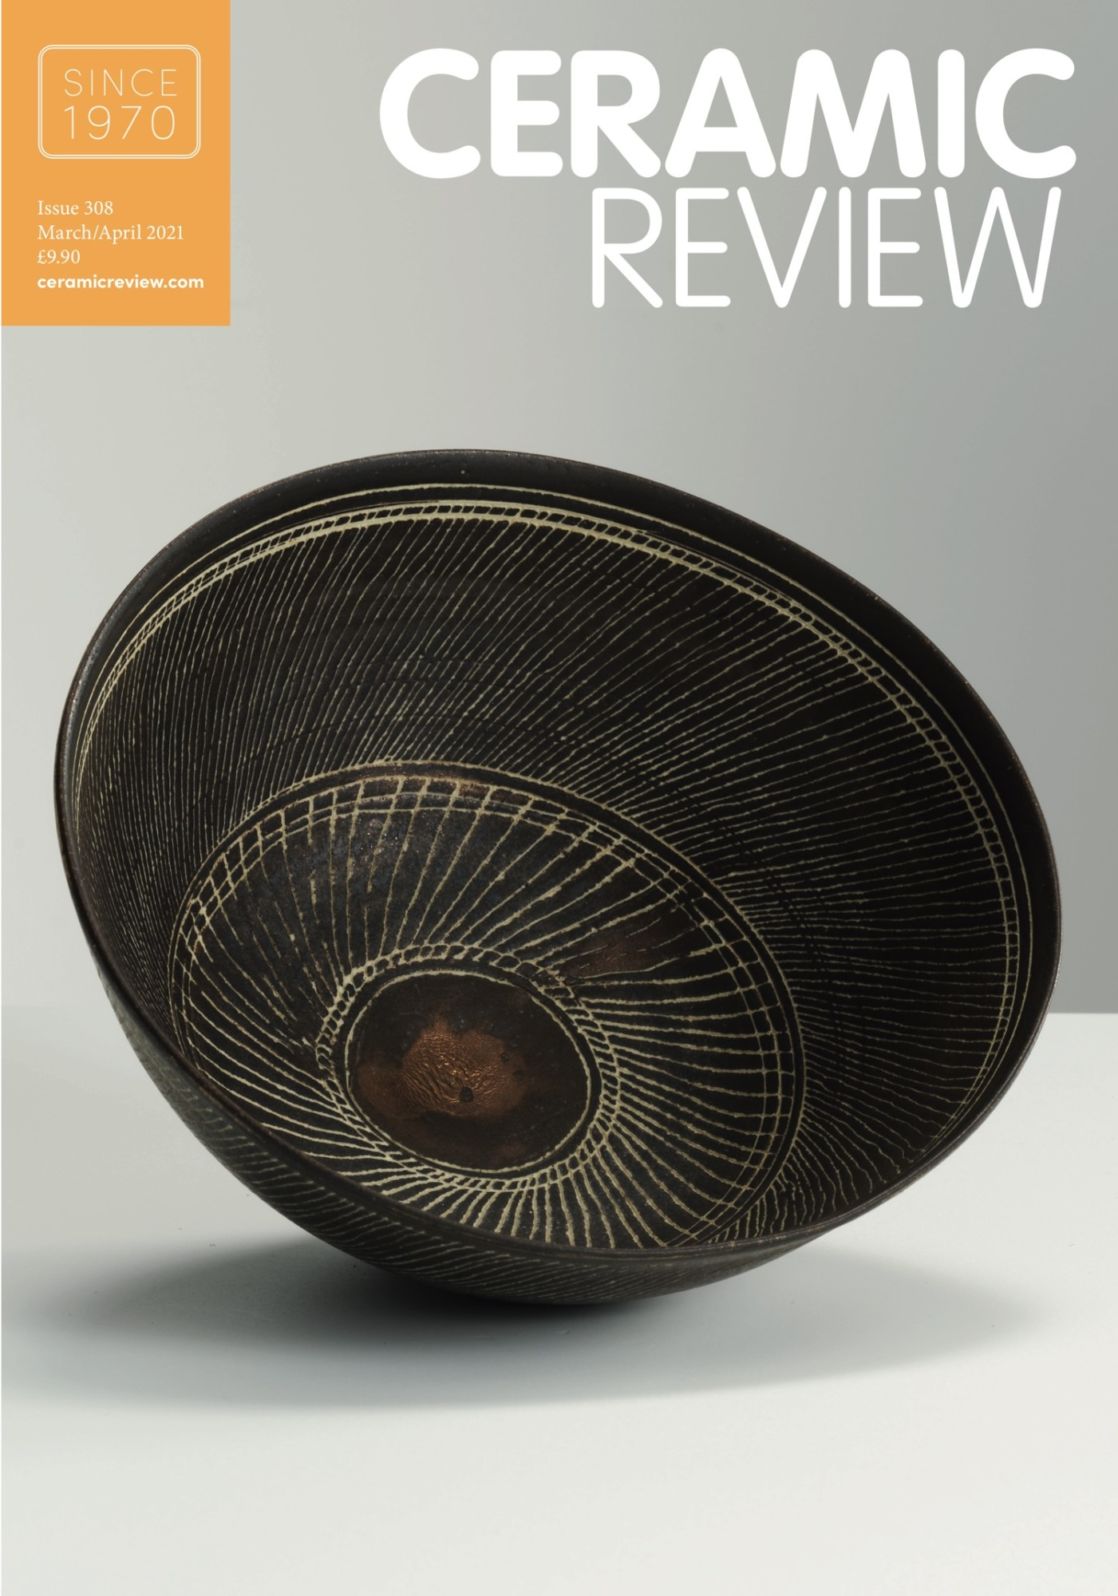 Issue 308 of Ceramic Review